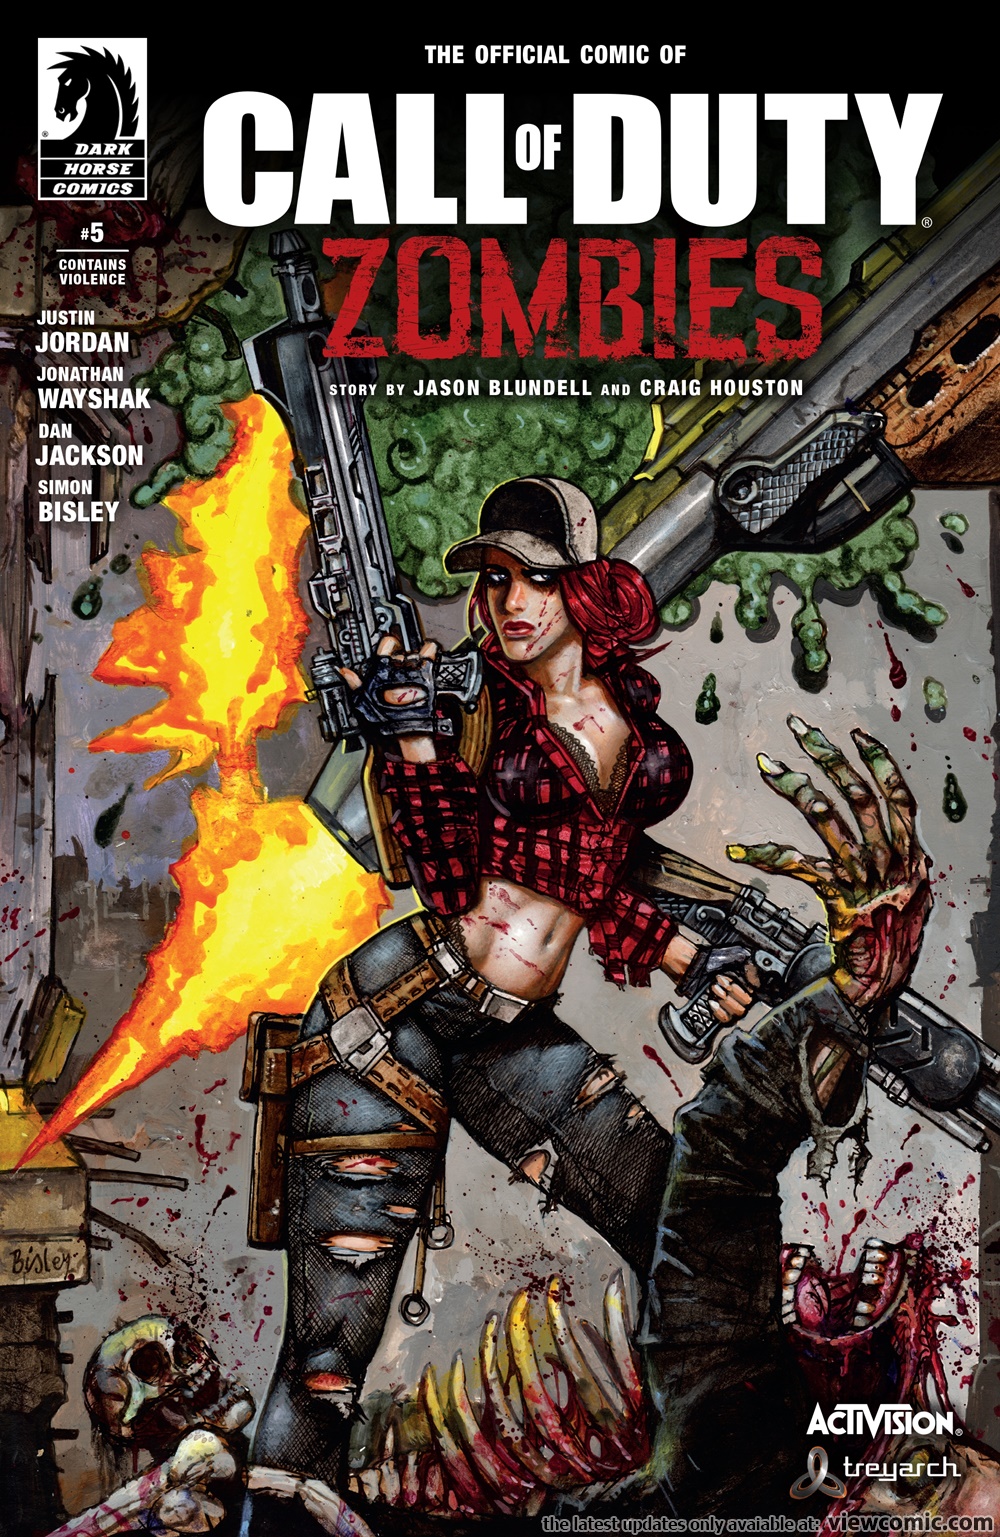 Call of duty zombie porn comic